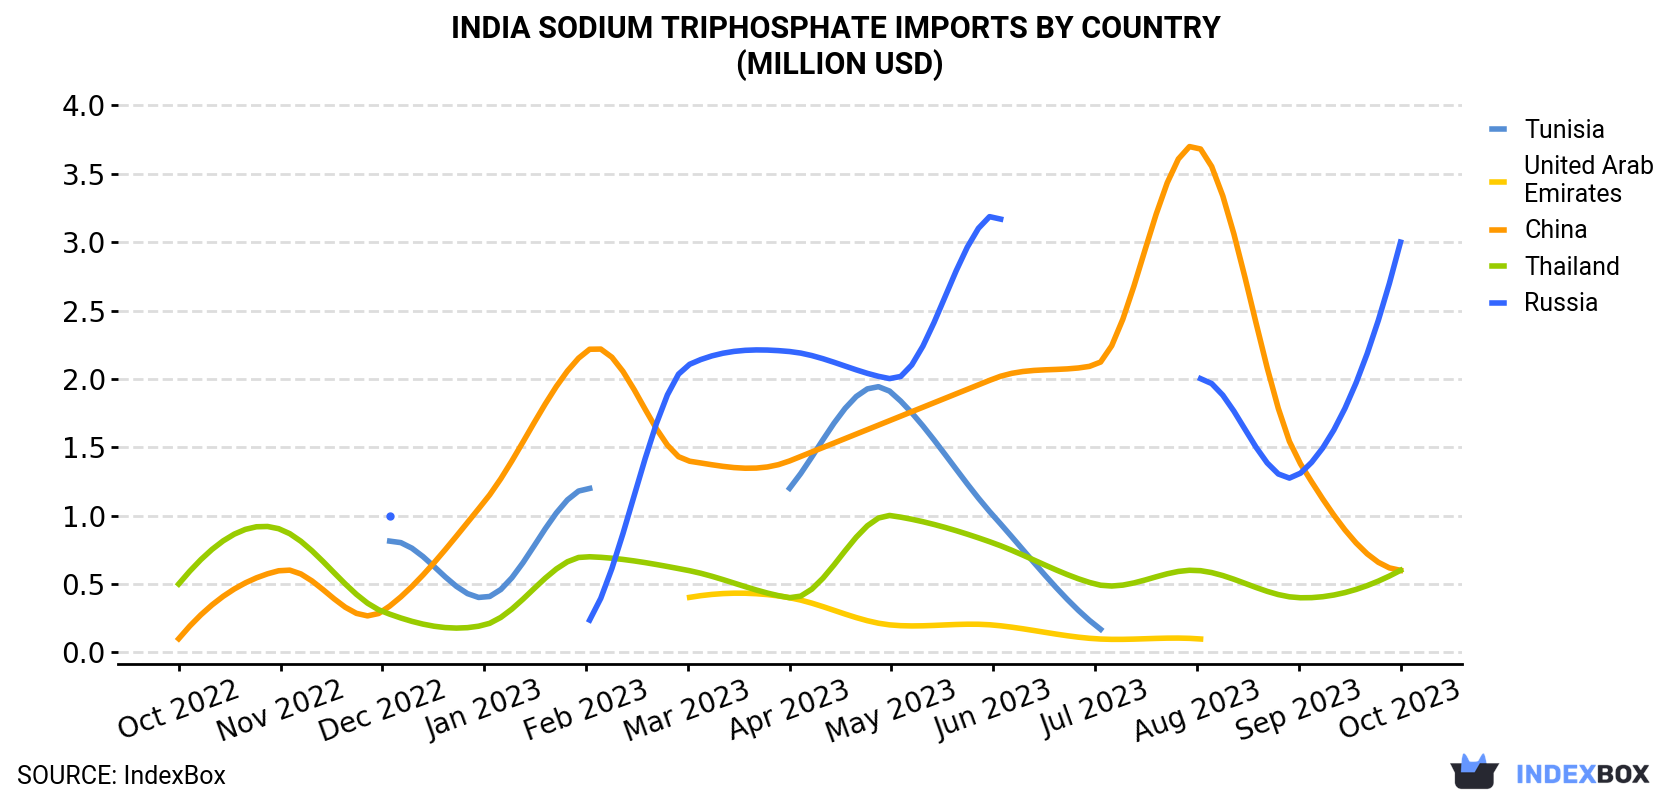 India Sodium Triphosphate Imports By Country (Million USD)